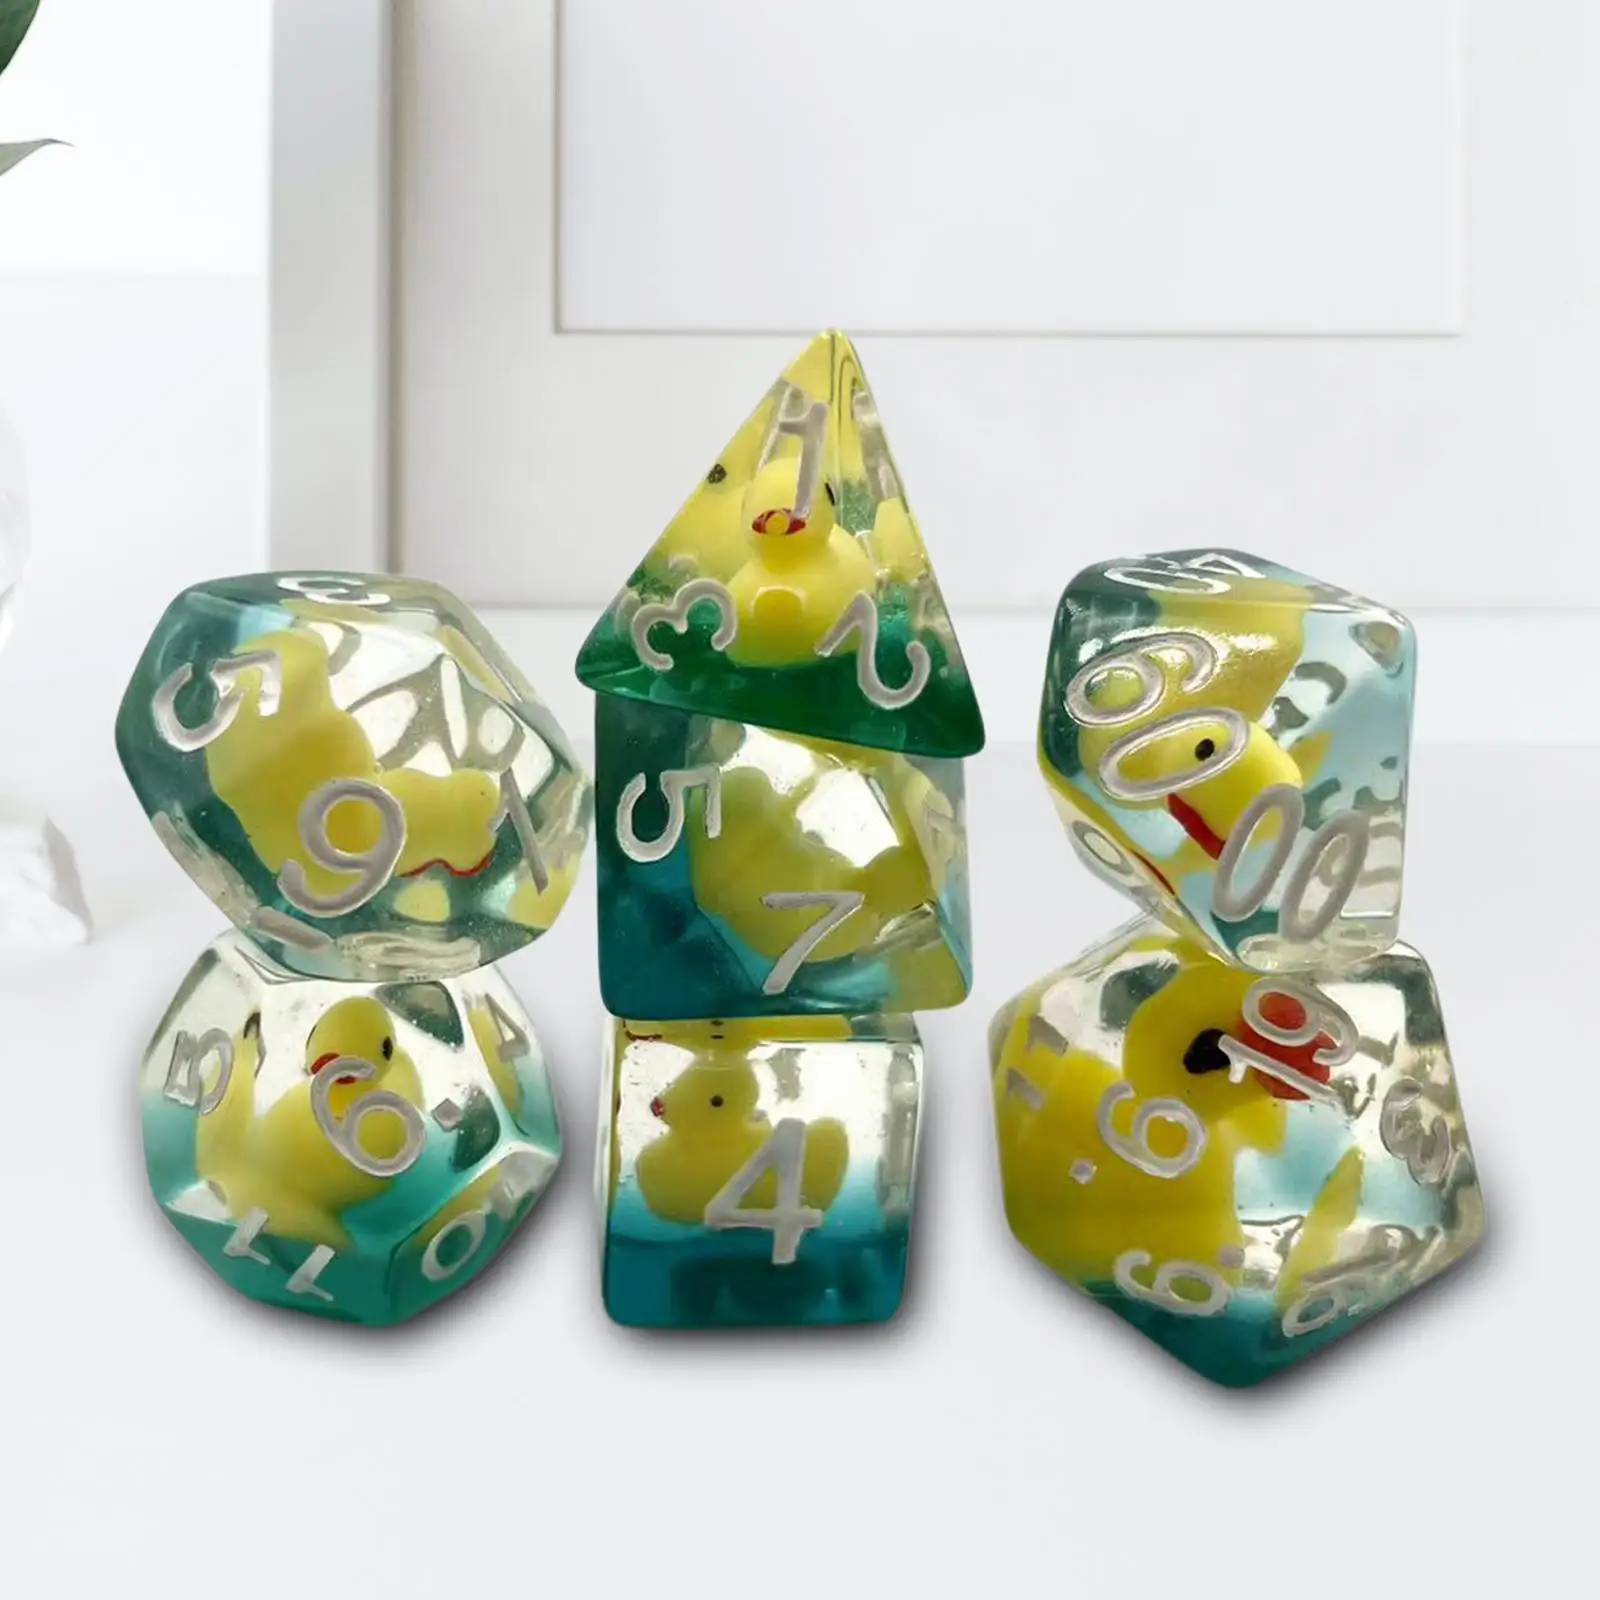 7x Polyhedral Dices Set Filled with Ducks Animal Bar Toys D4-D20 for RPG Math Teaching Table Games Classroom Accessories